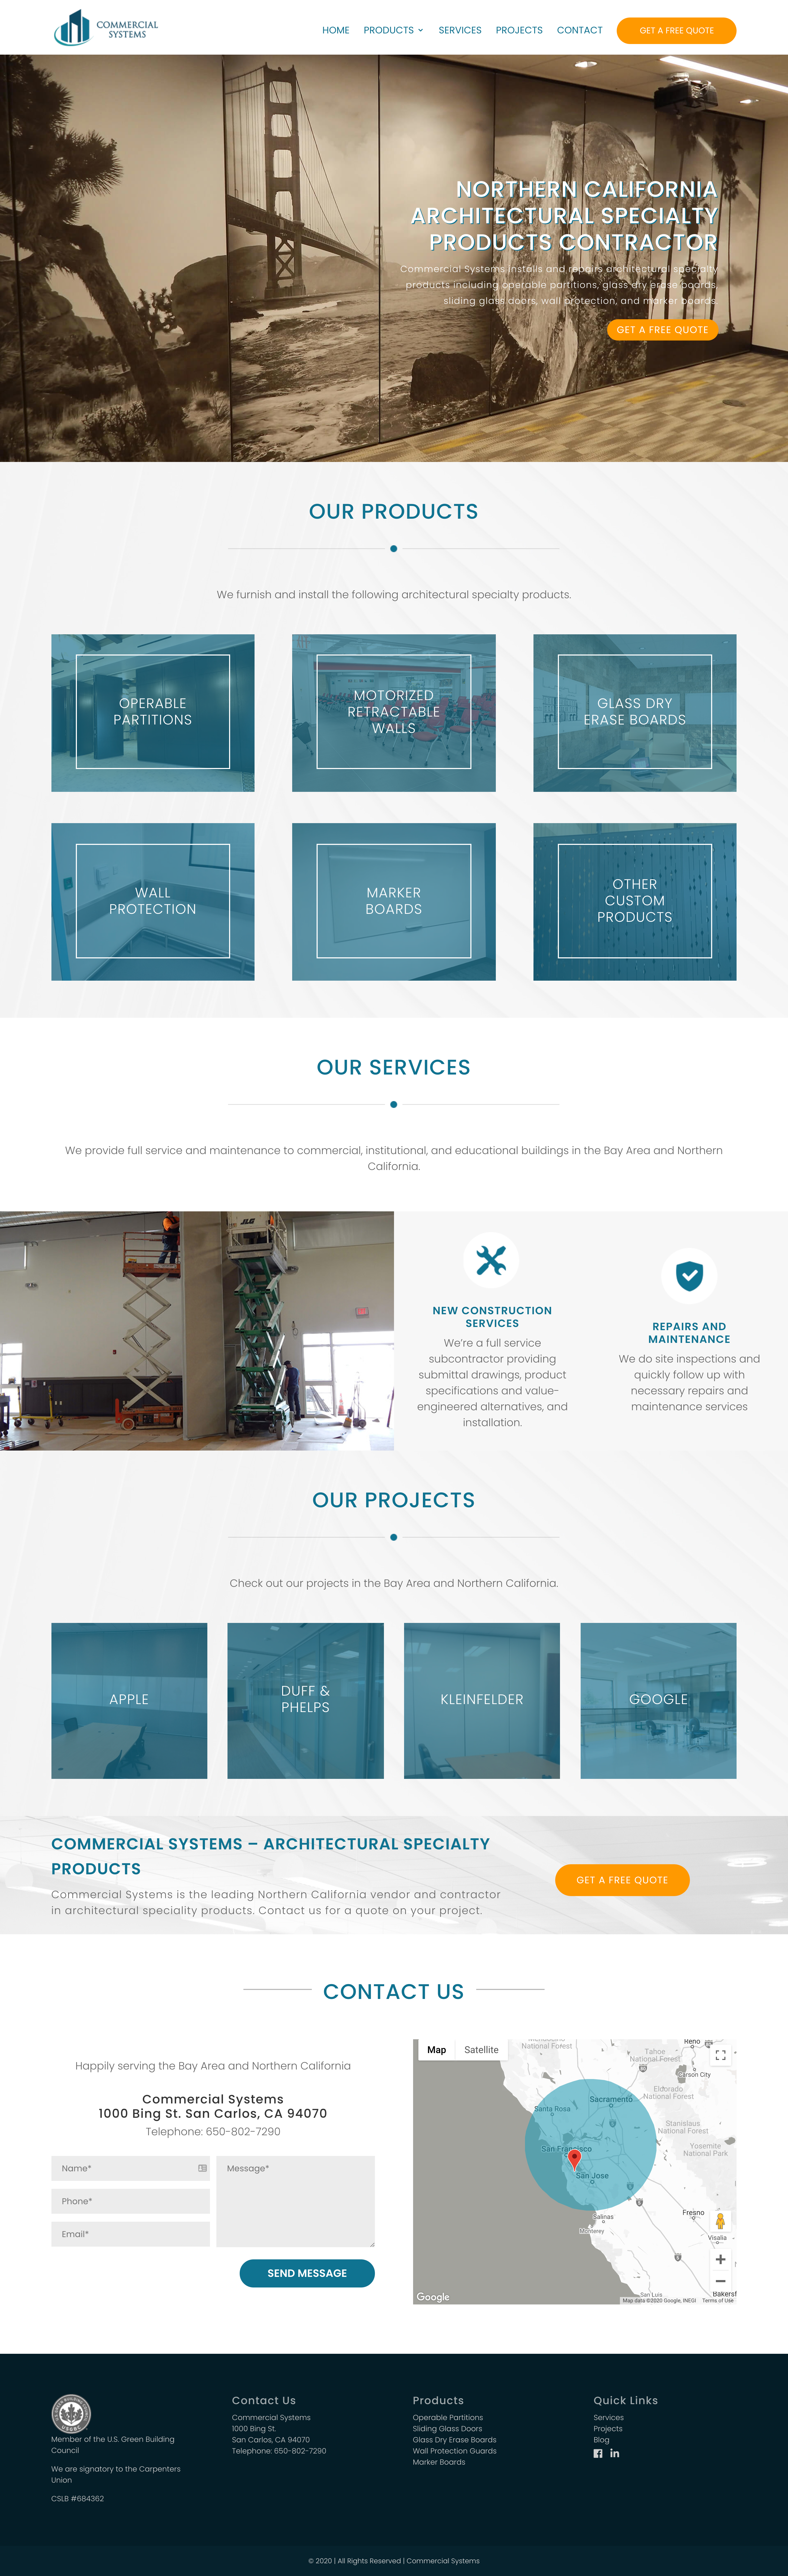 Commercial Systems Website Design